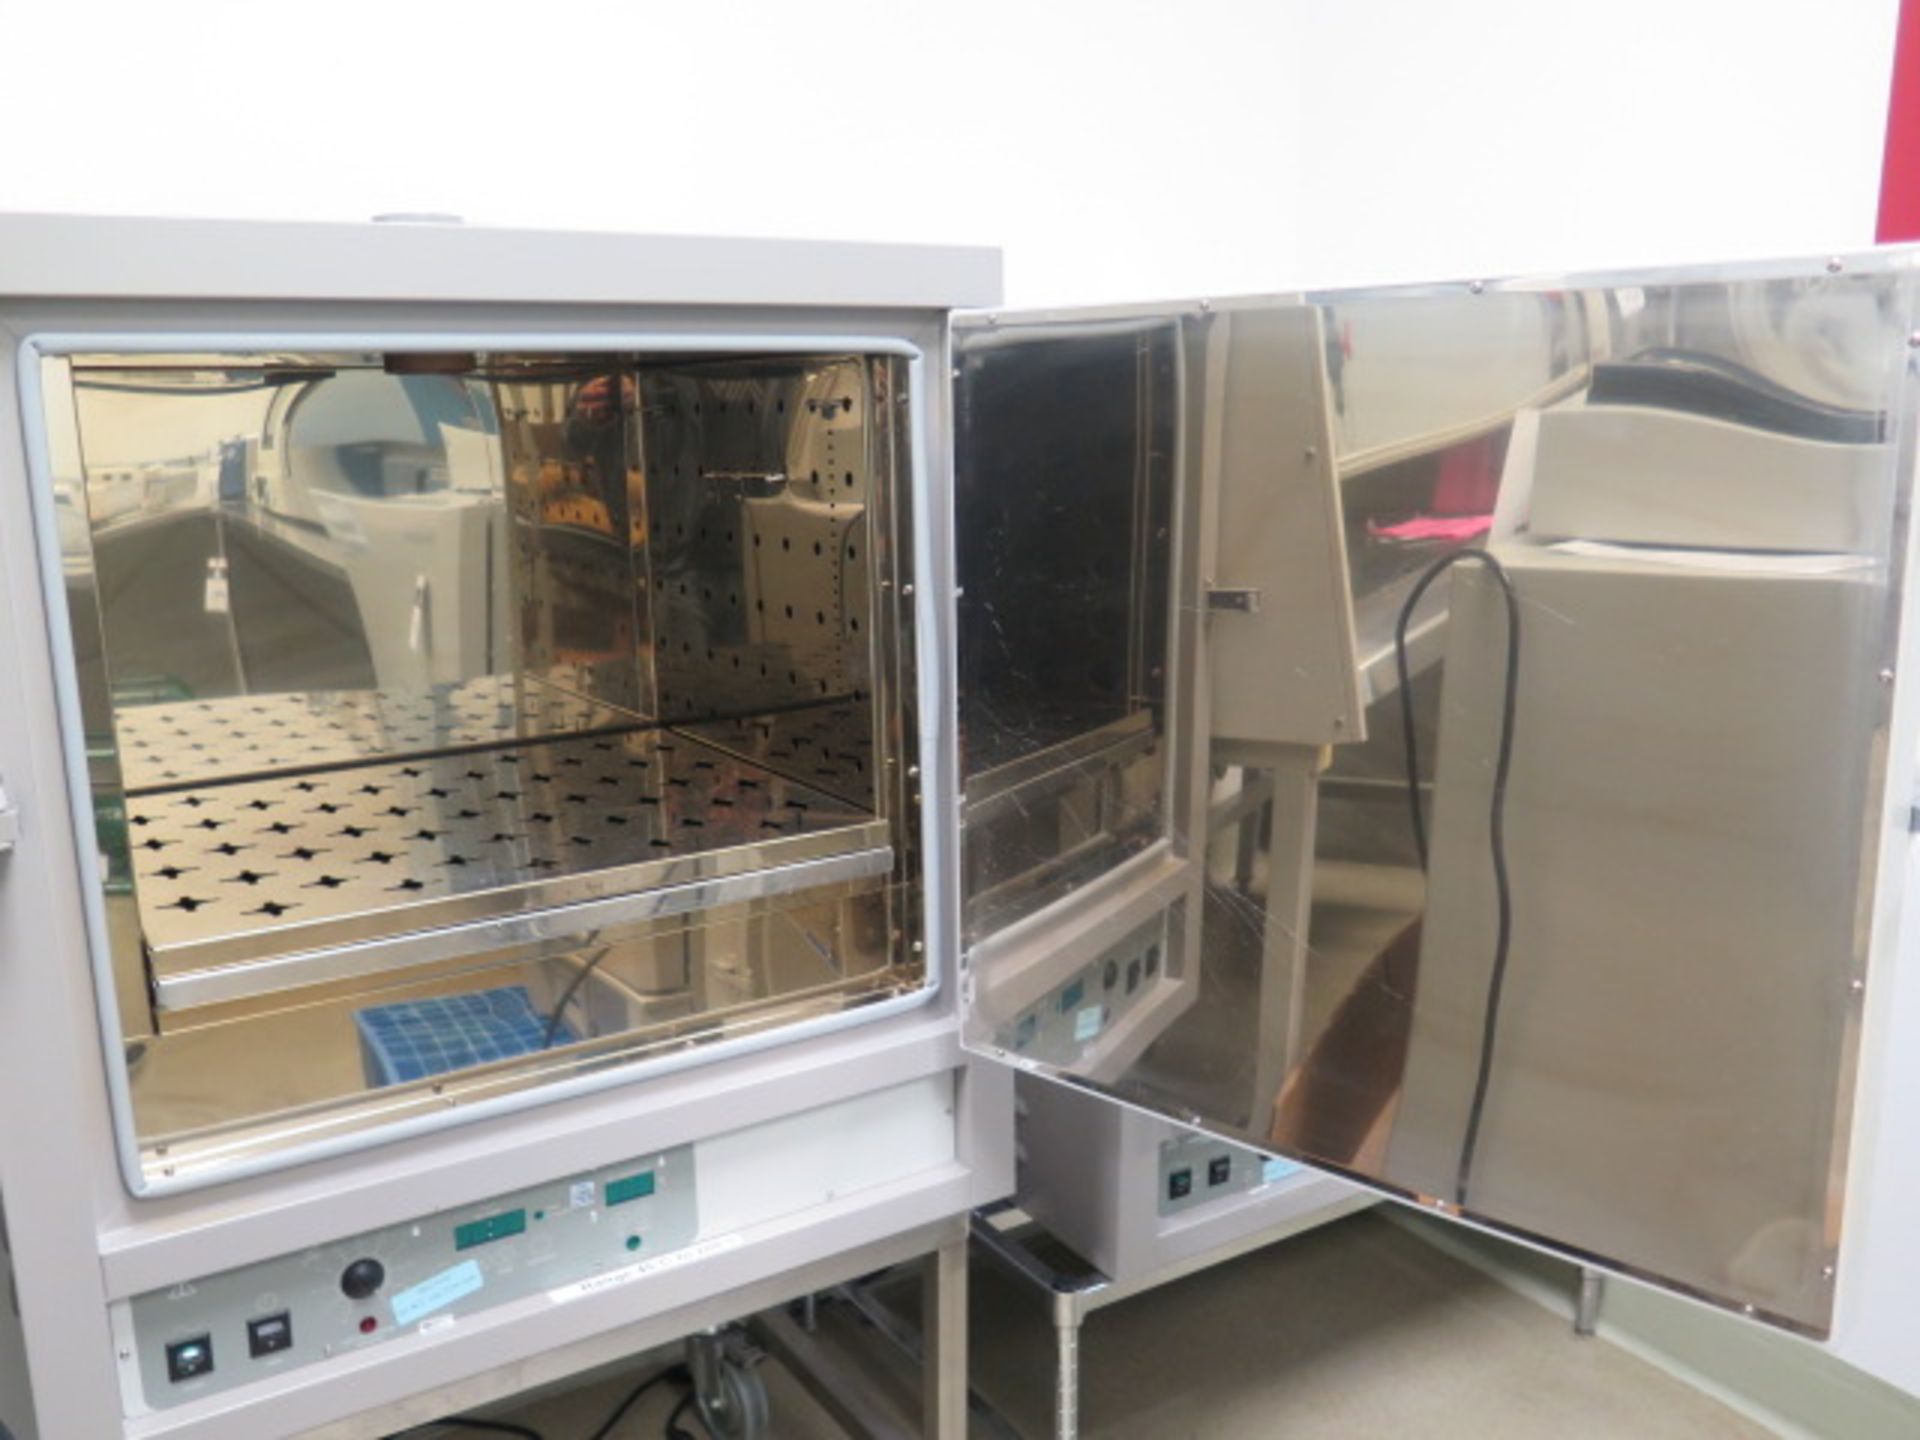 VWR mdl. 1370FM Lab Oven s/n 0700900 45-200 Degrees C (SOLD AS-IS - NO WARRANTY) - Image 2 of 7